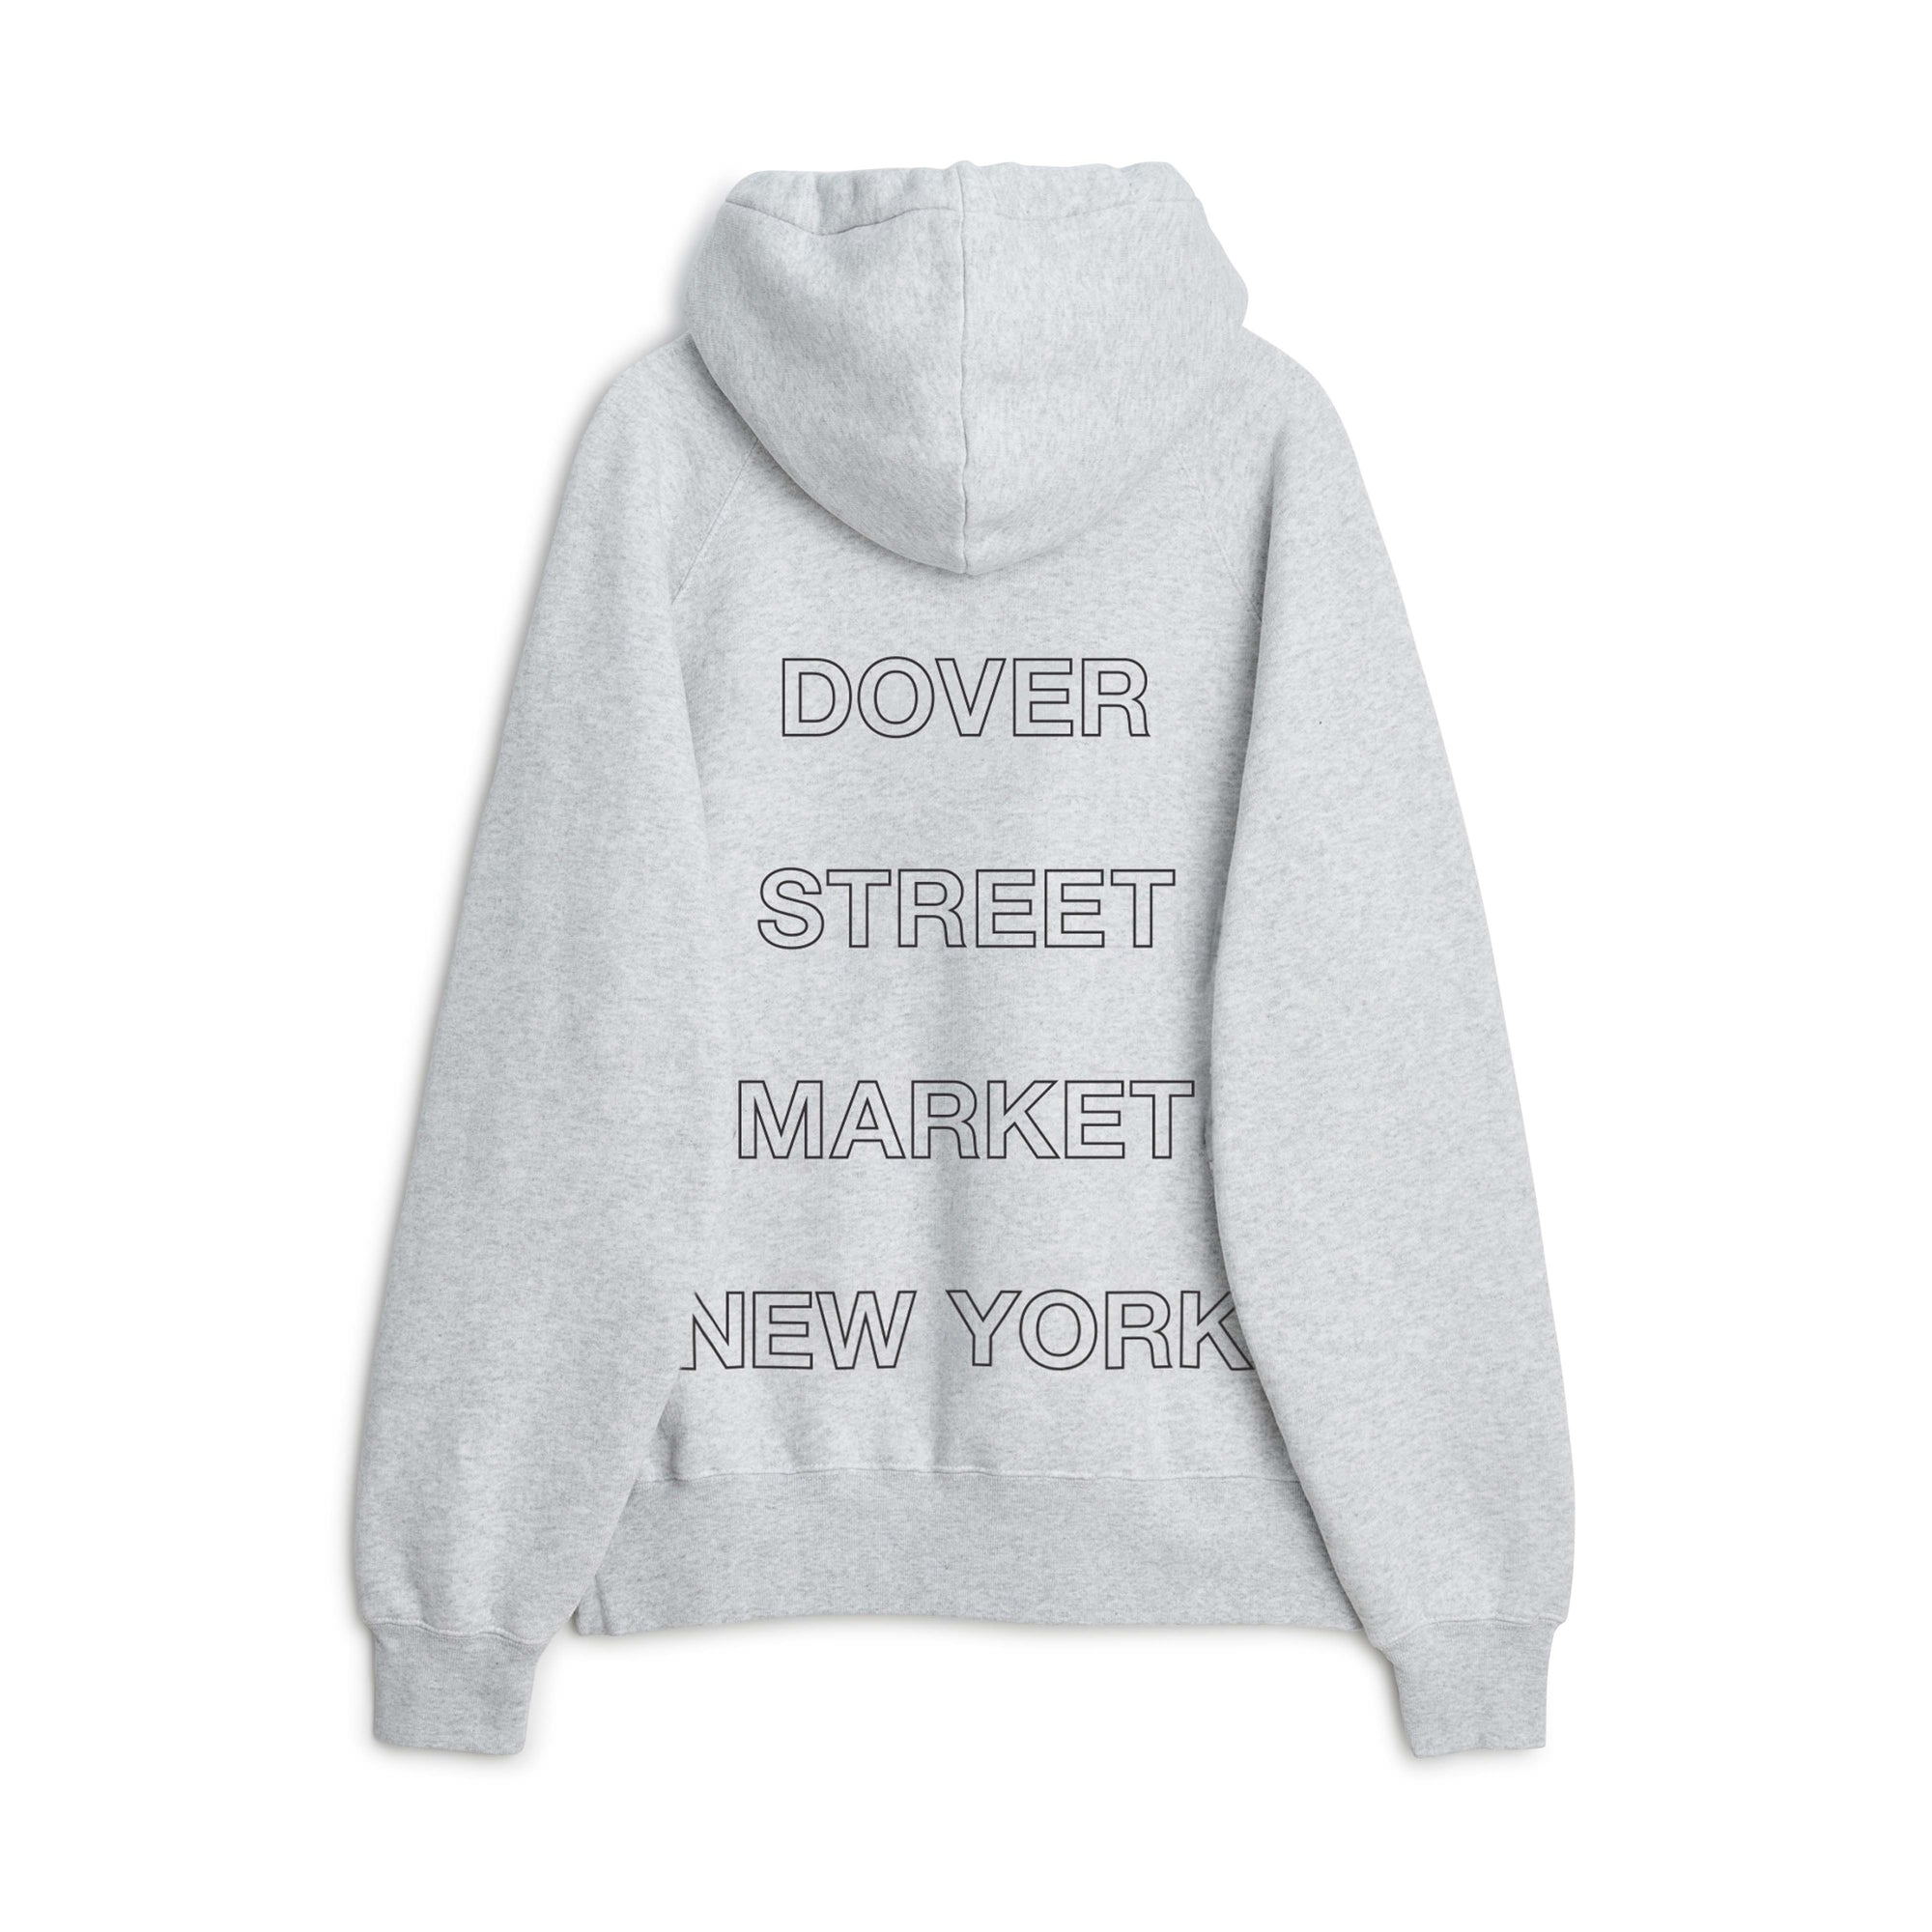 Our Legacy - DSMNY Men's Work Shop Hood - (Grey) view 1